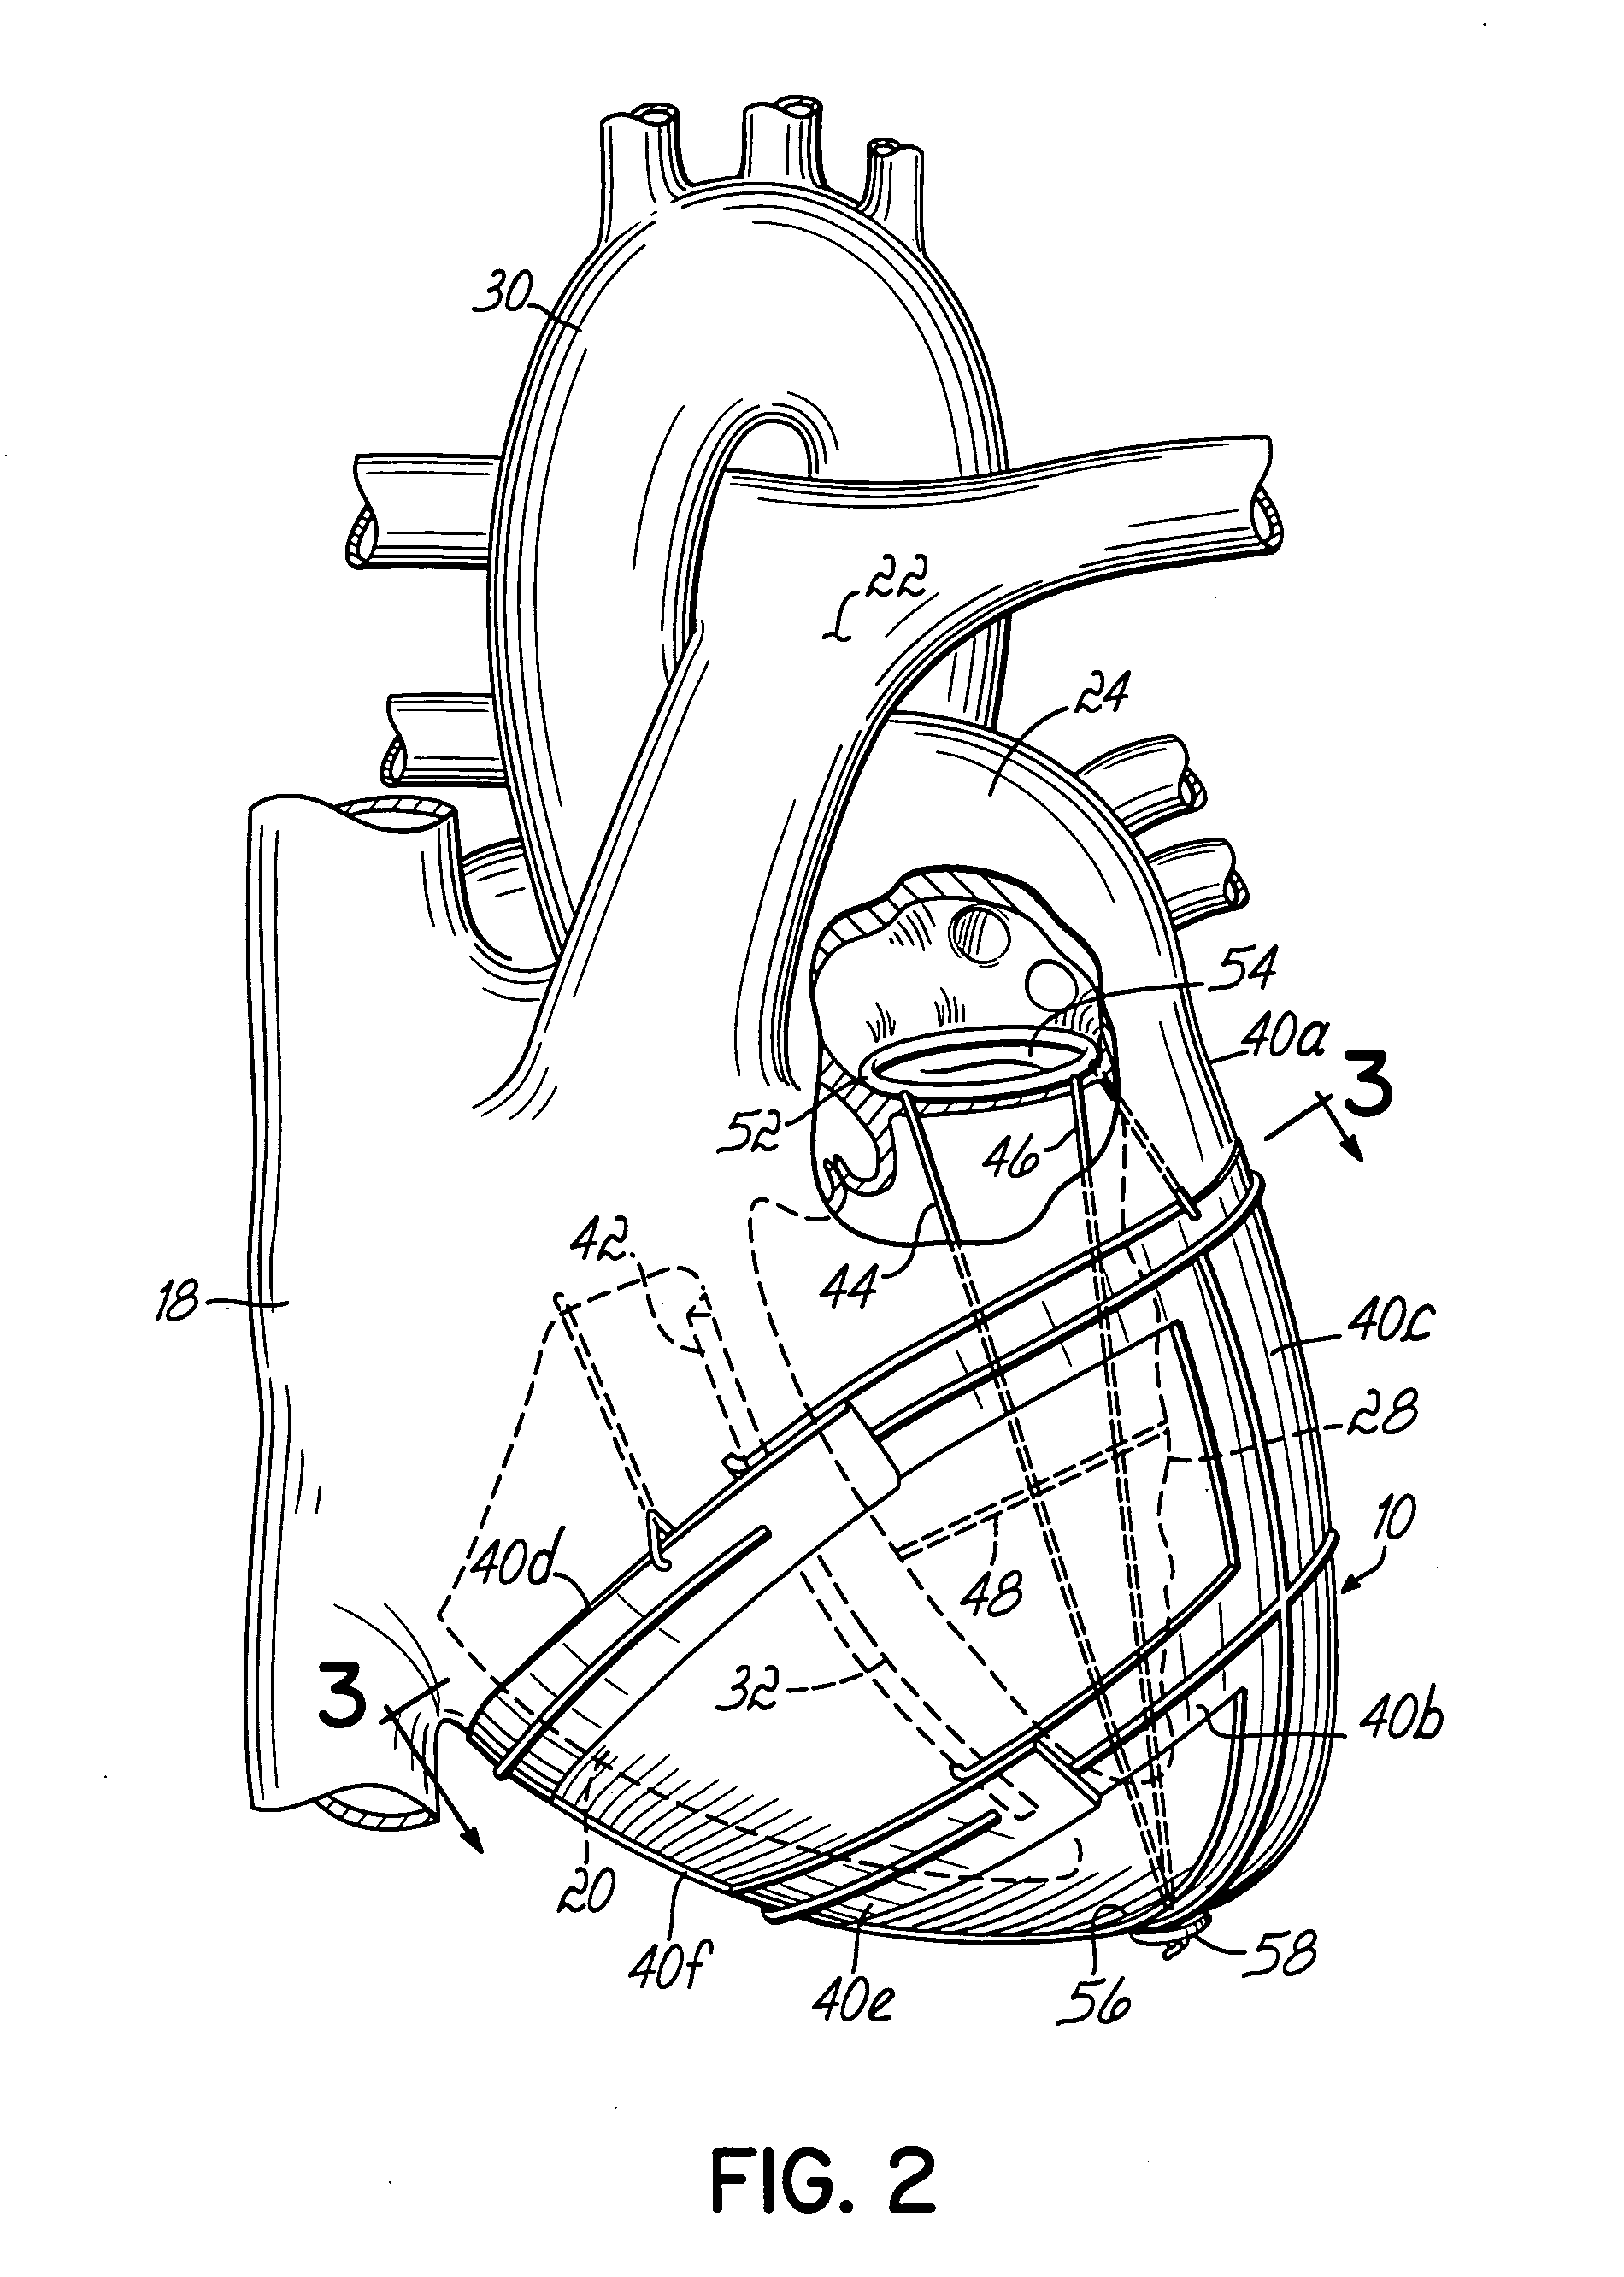 Implantable heart assist devices and methods